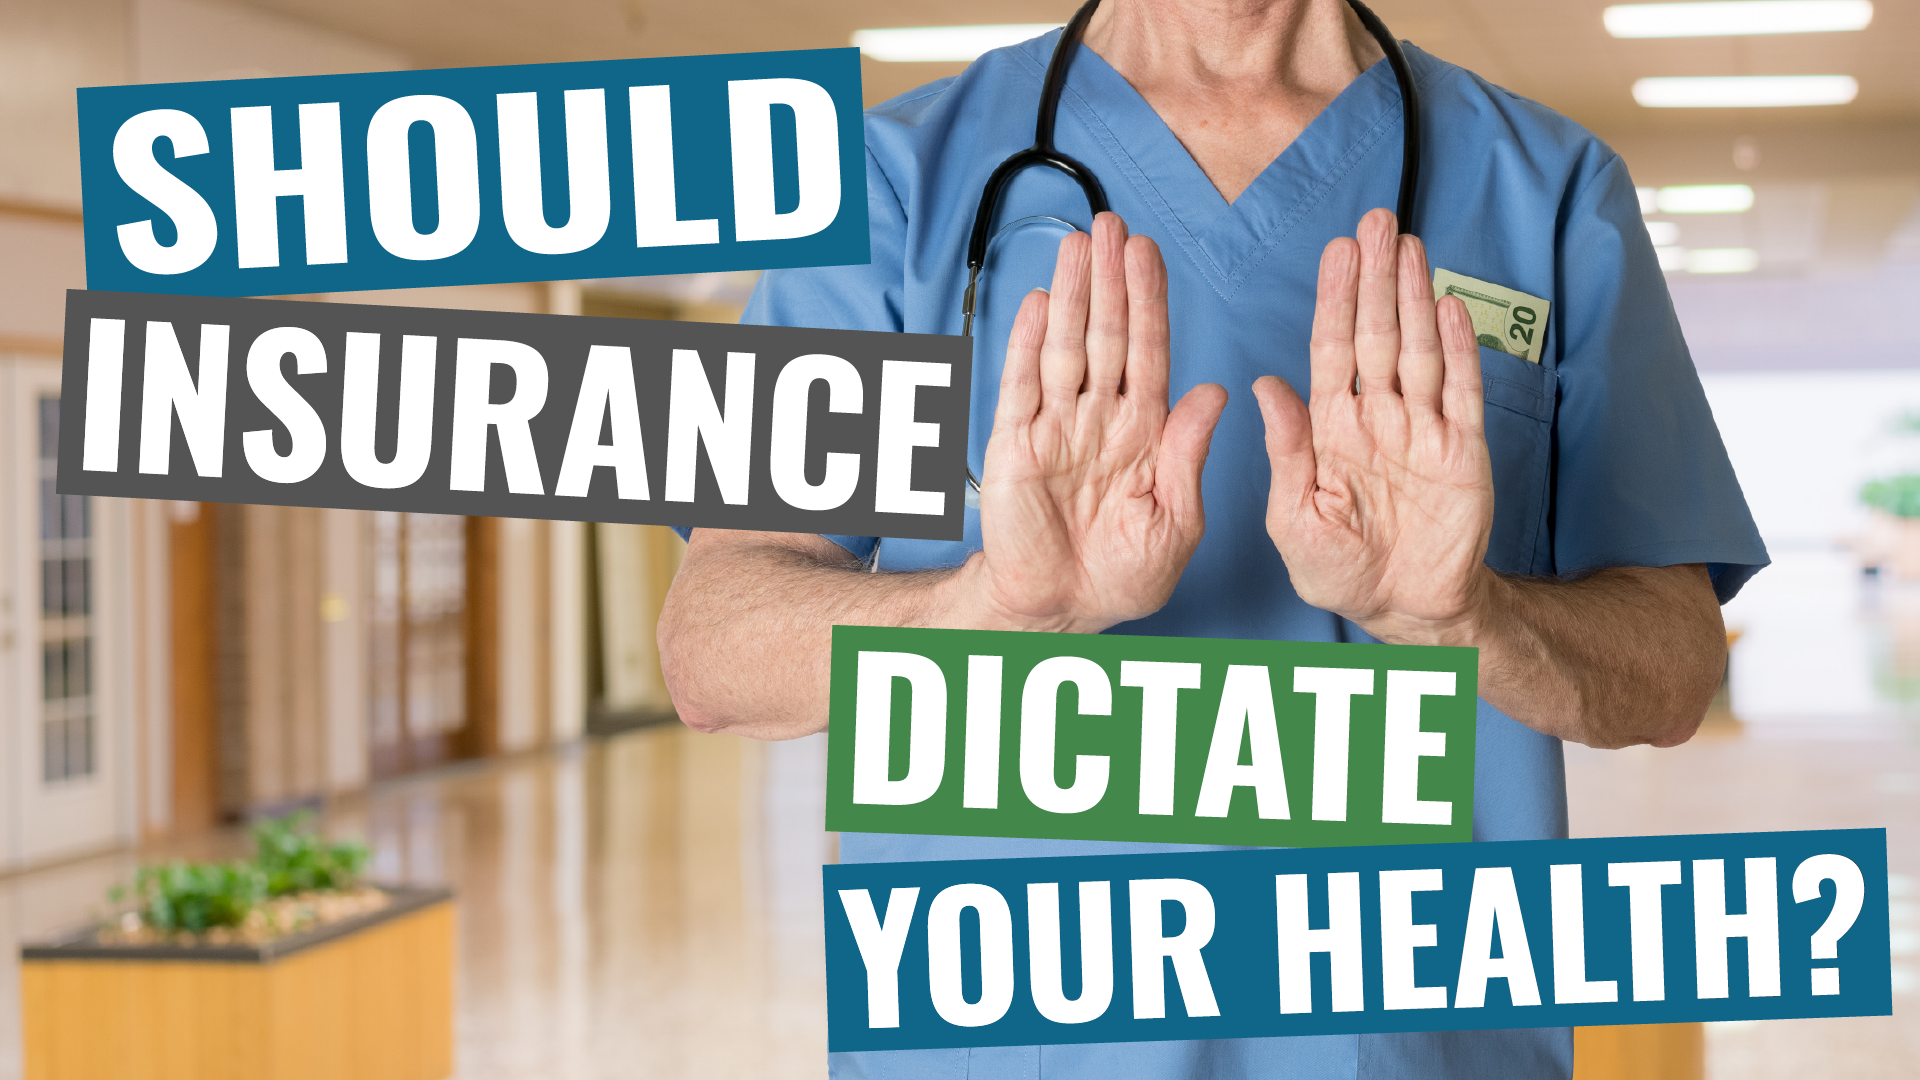 006 – Should Insurance Dictate Your Health?